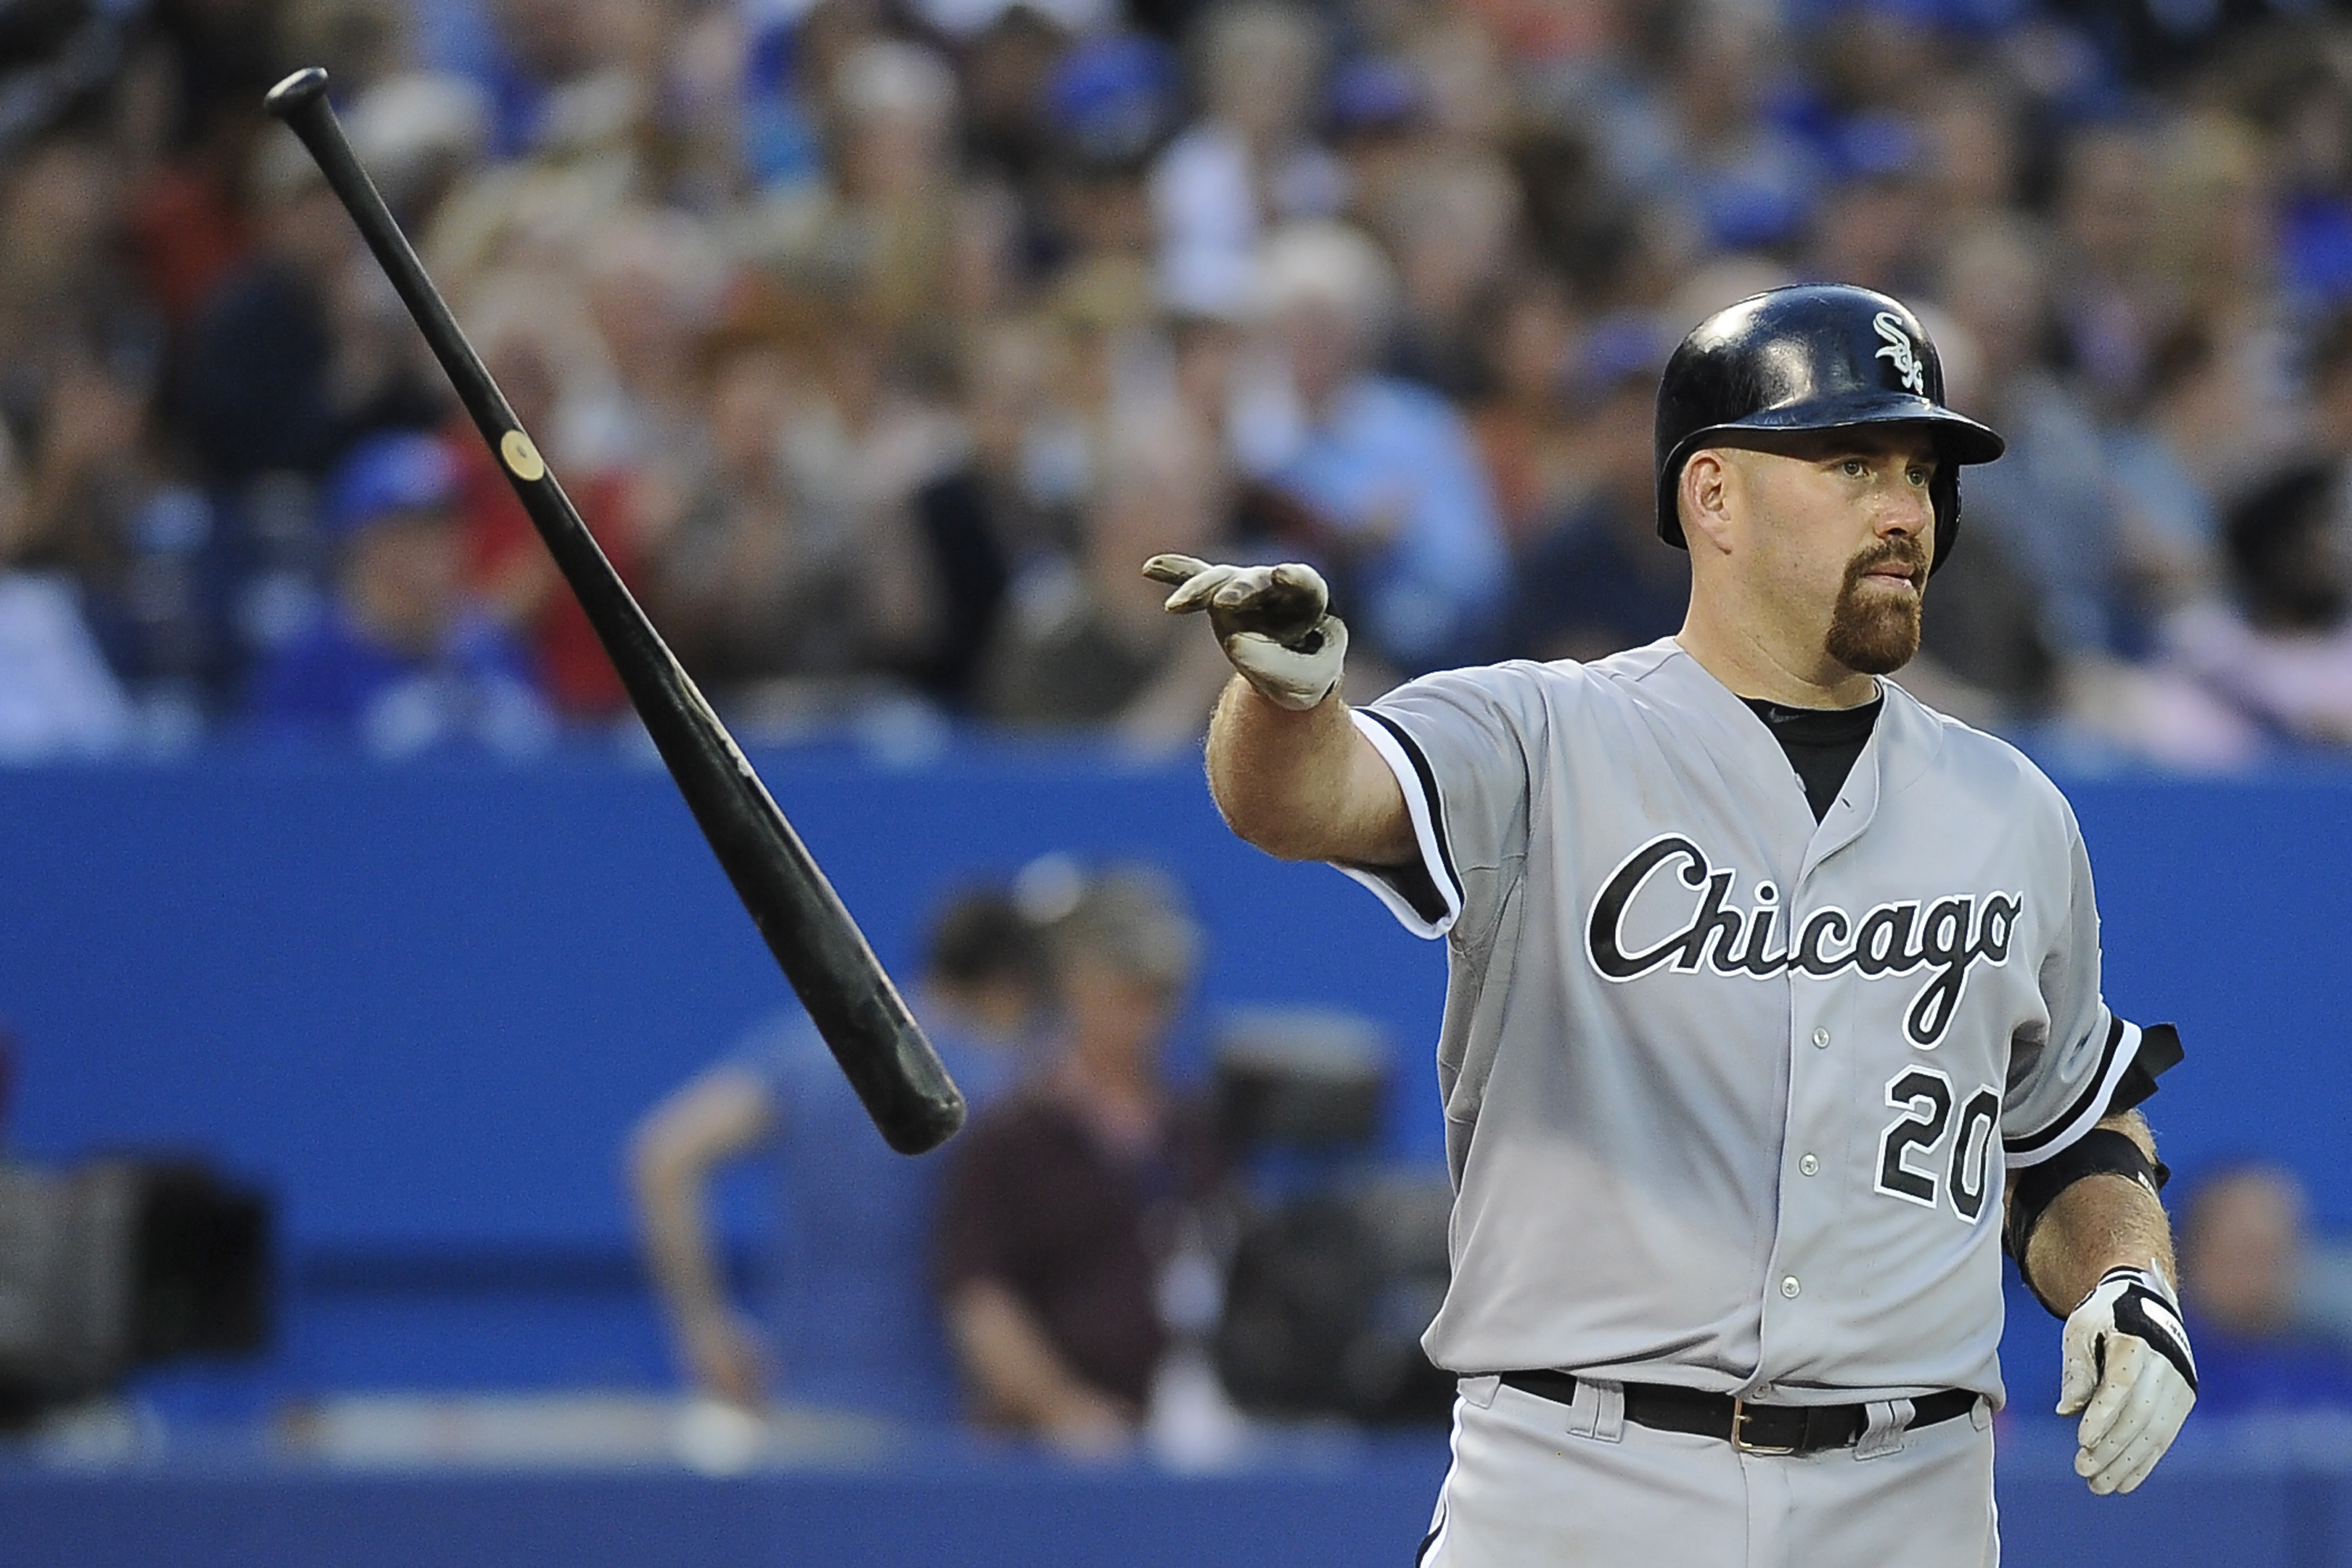 The Kevin Youkilis Trade Return: Zach Stewart And Brent Lillibridge